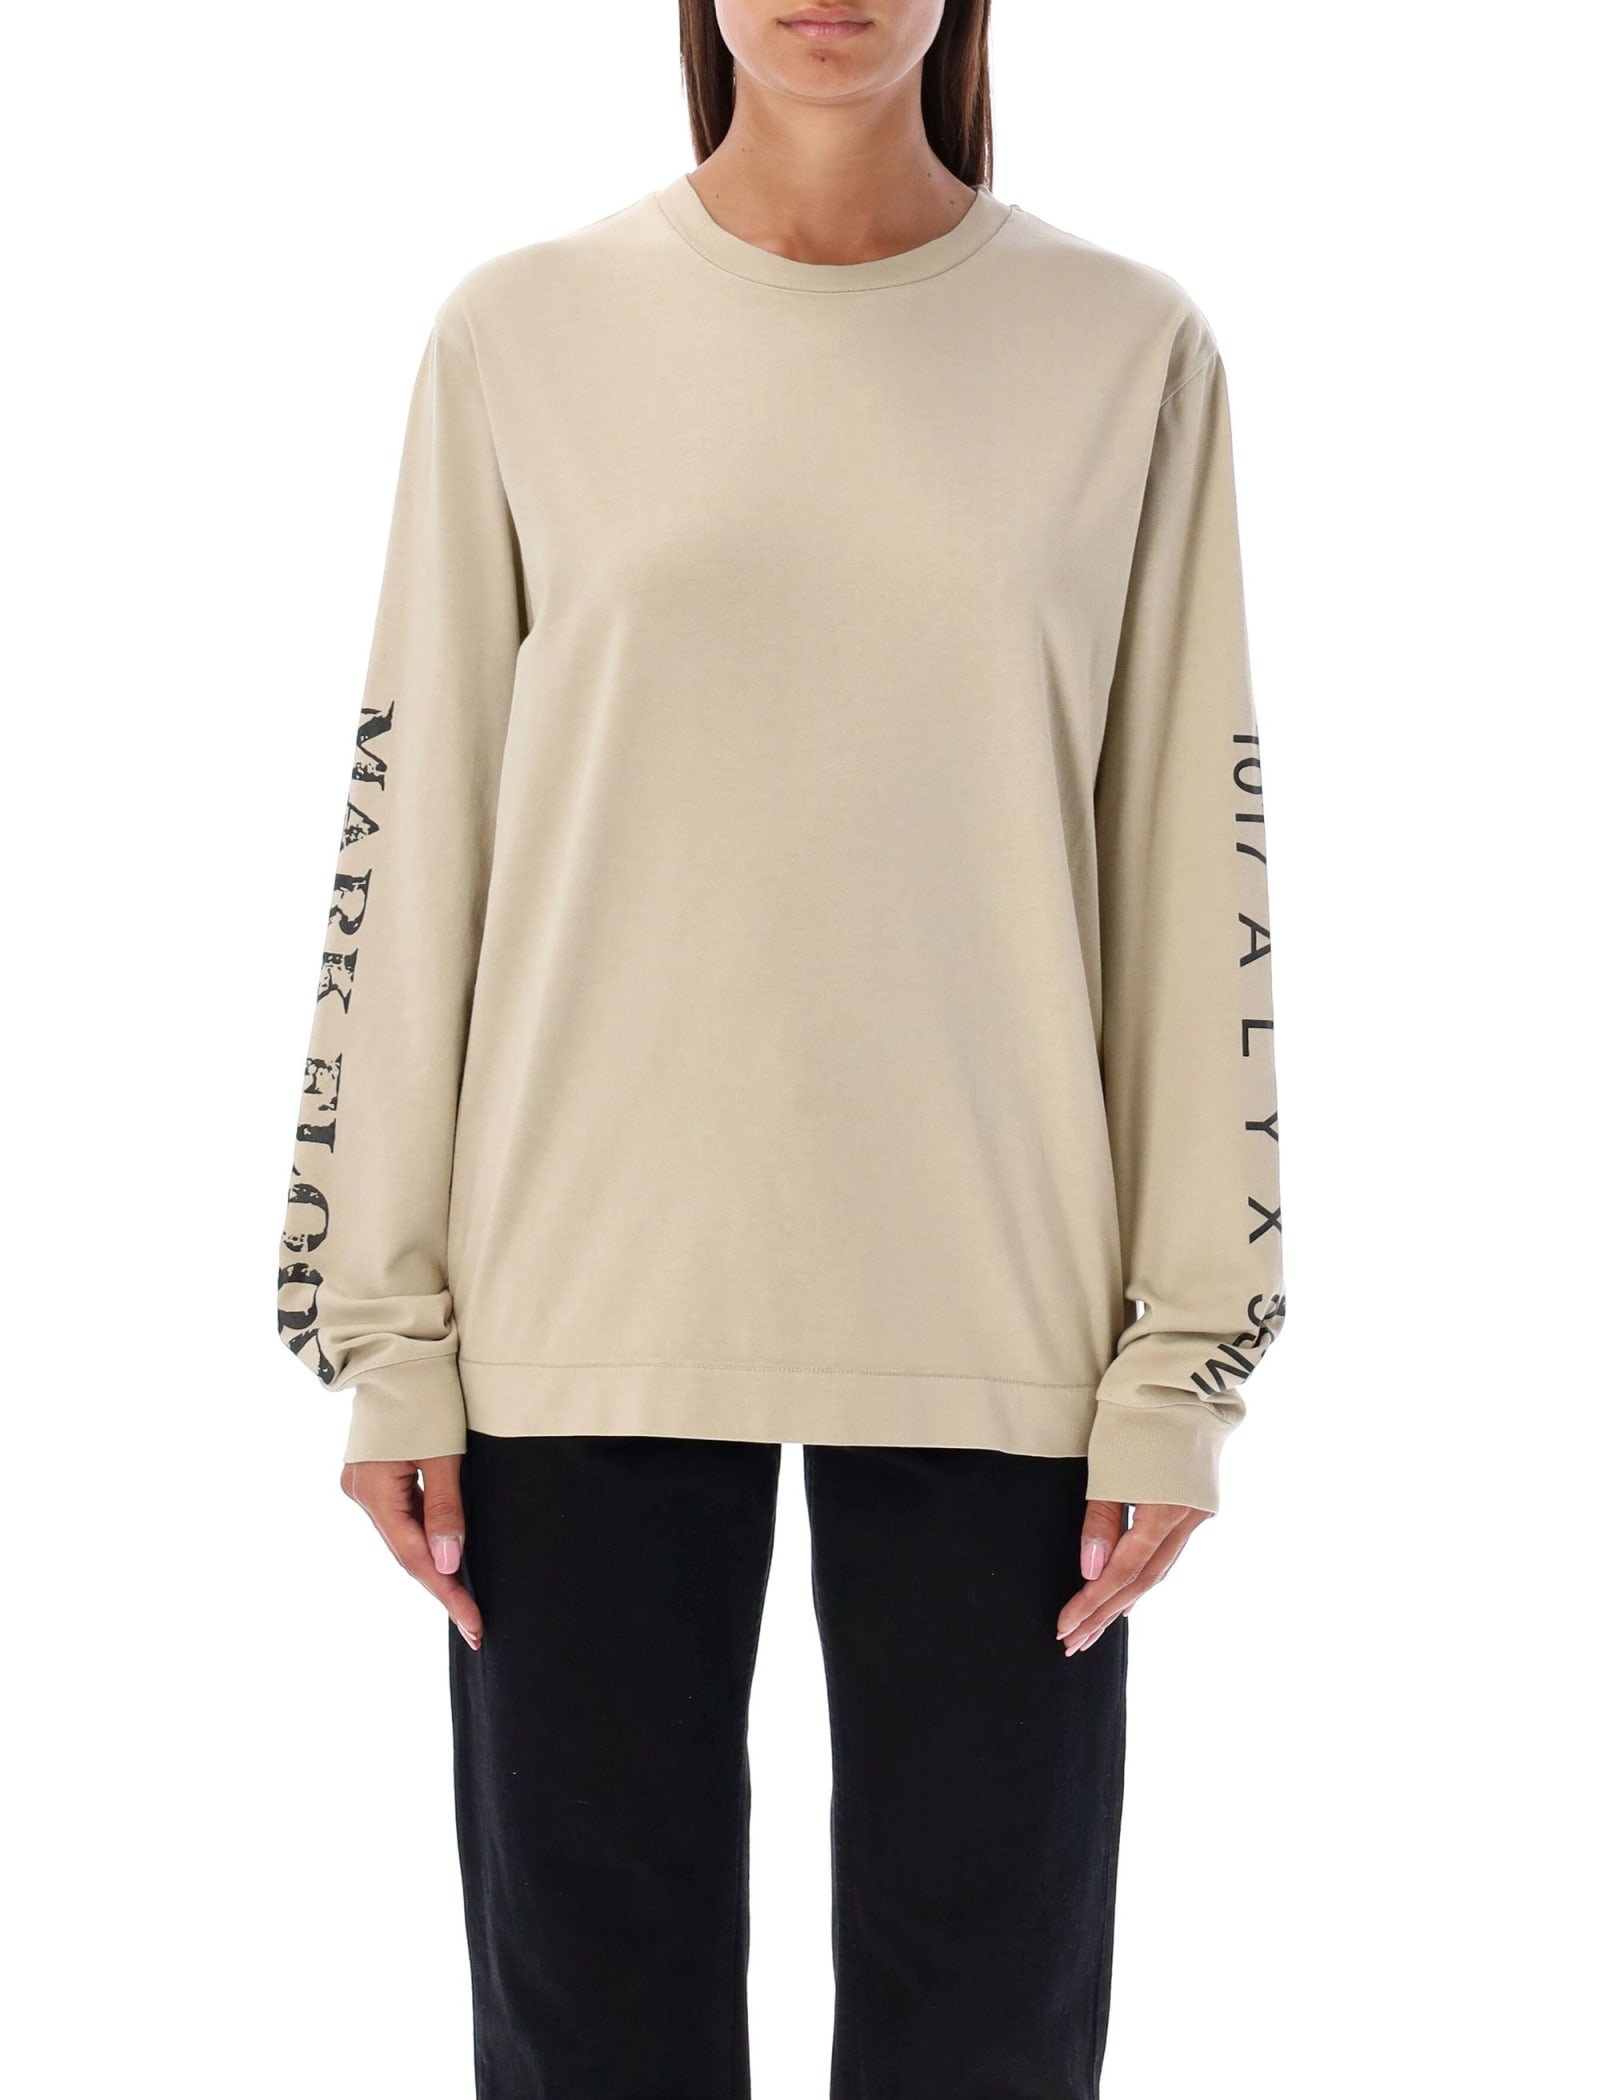 Long-sleeved Graphic T-shirt